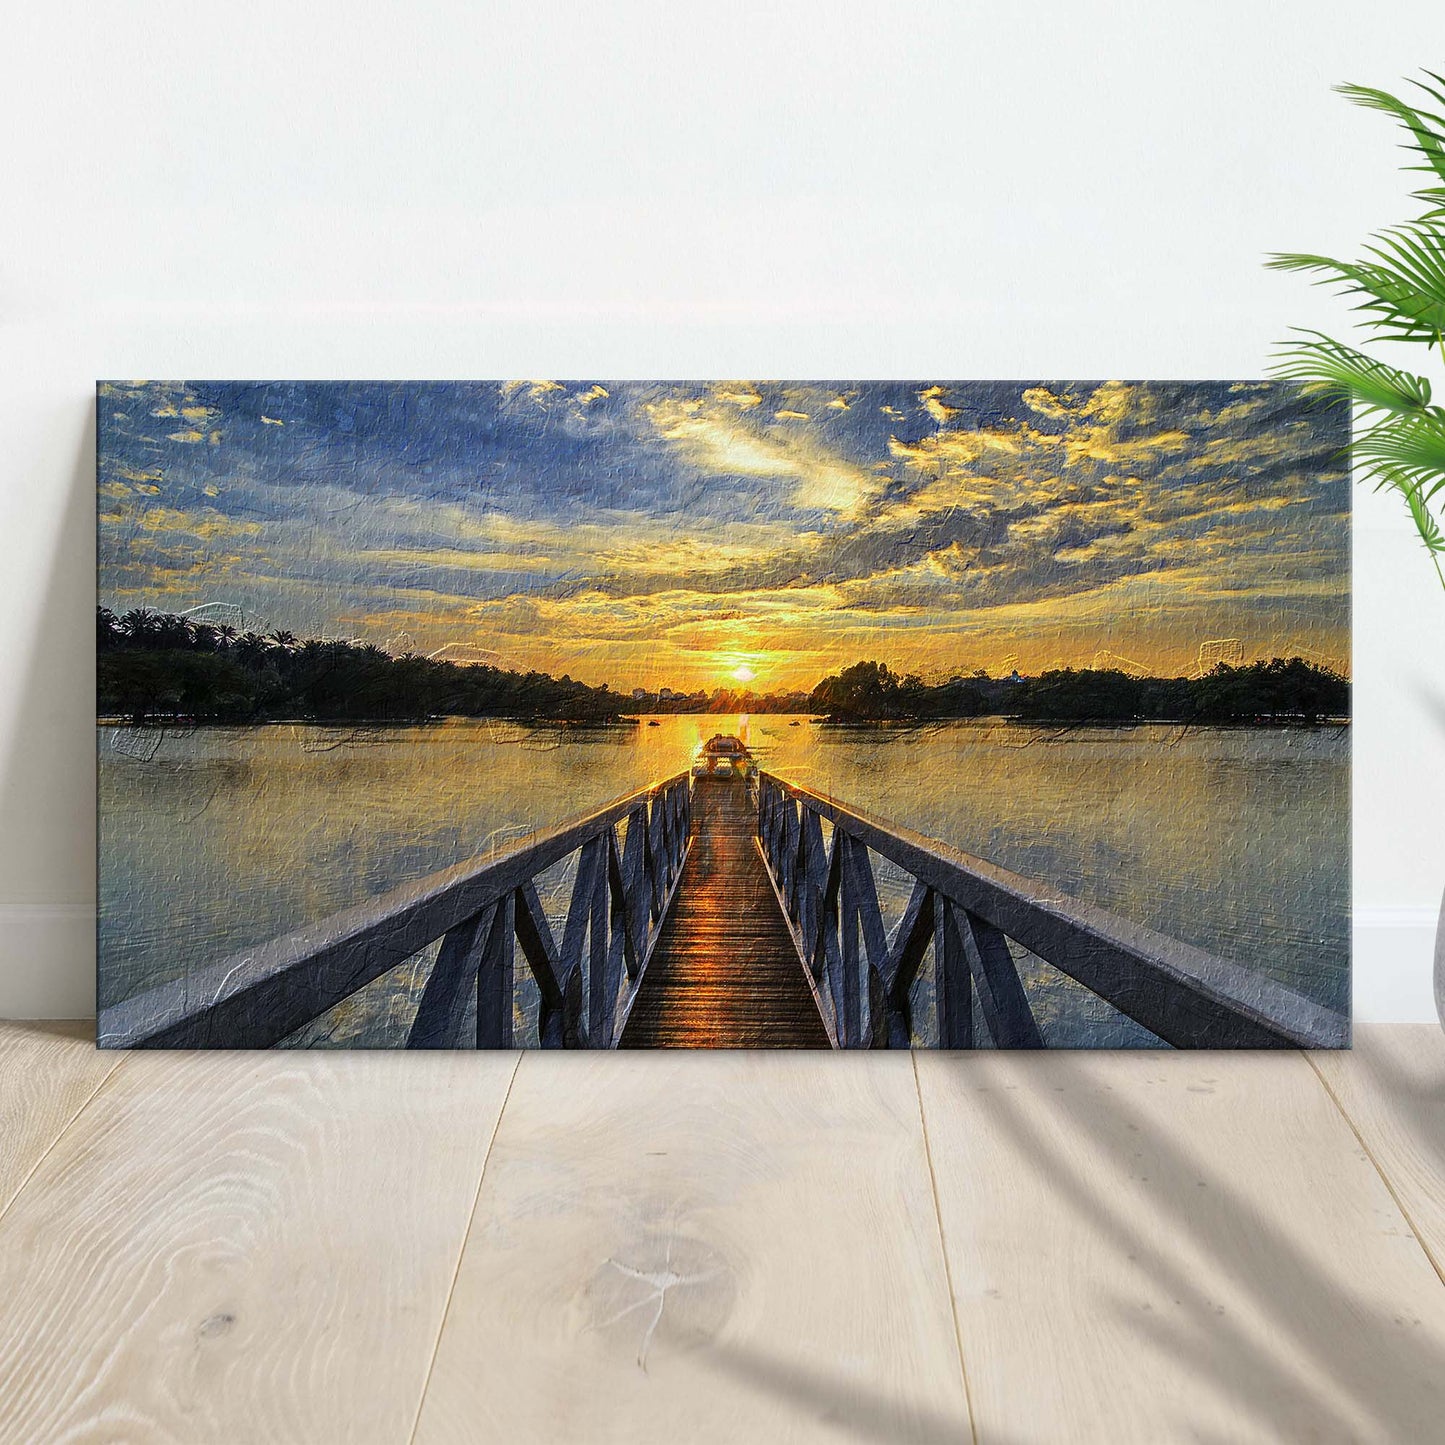 Vibrant Sunset Lake Canvas Wall Art - Image by Tailored Canvases